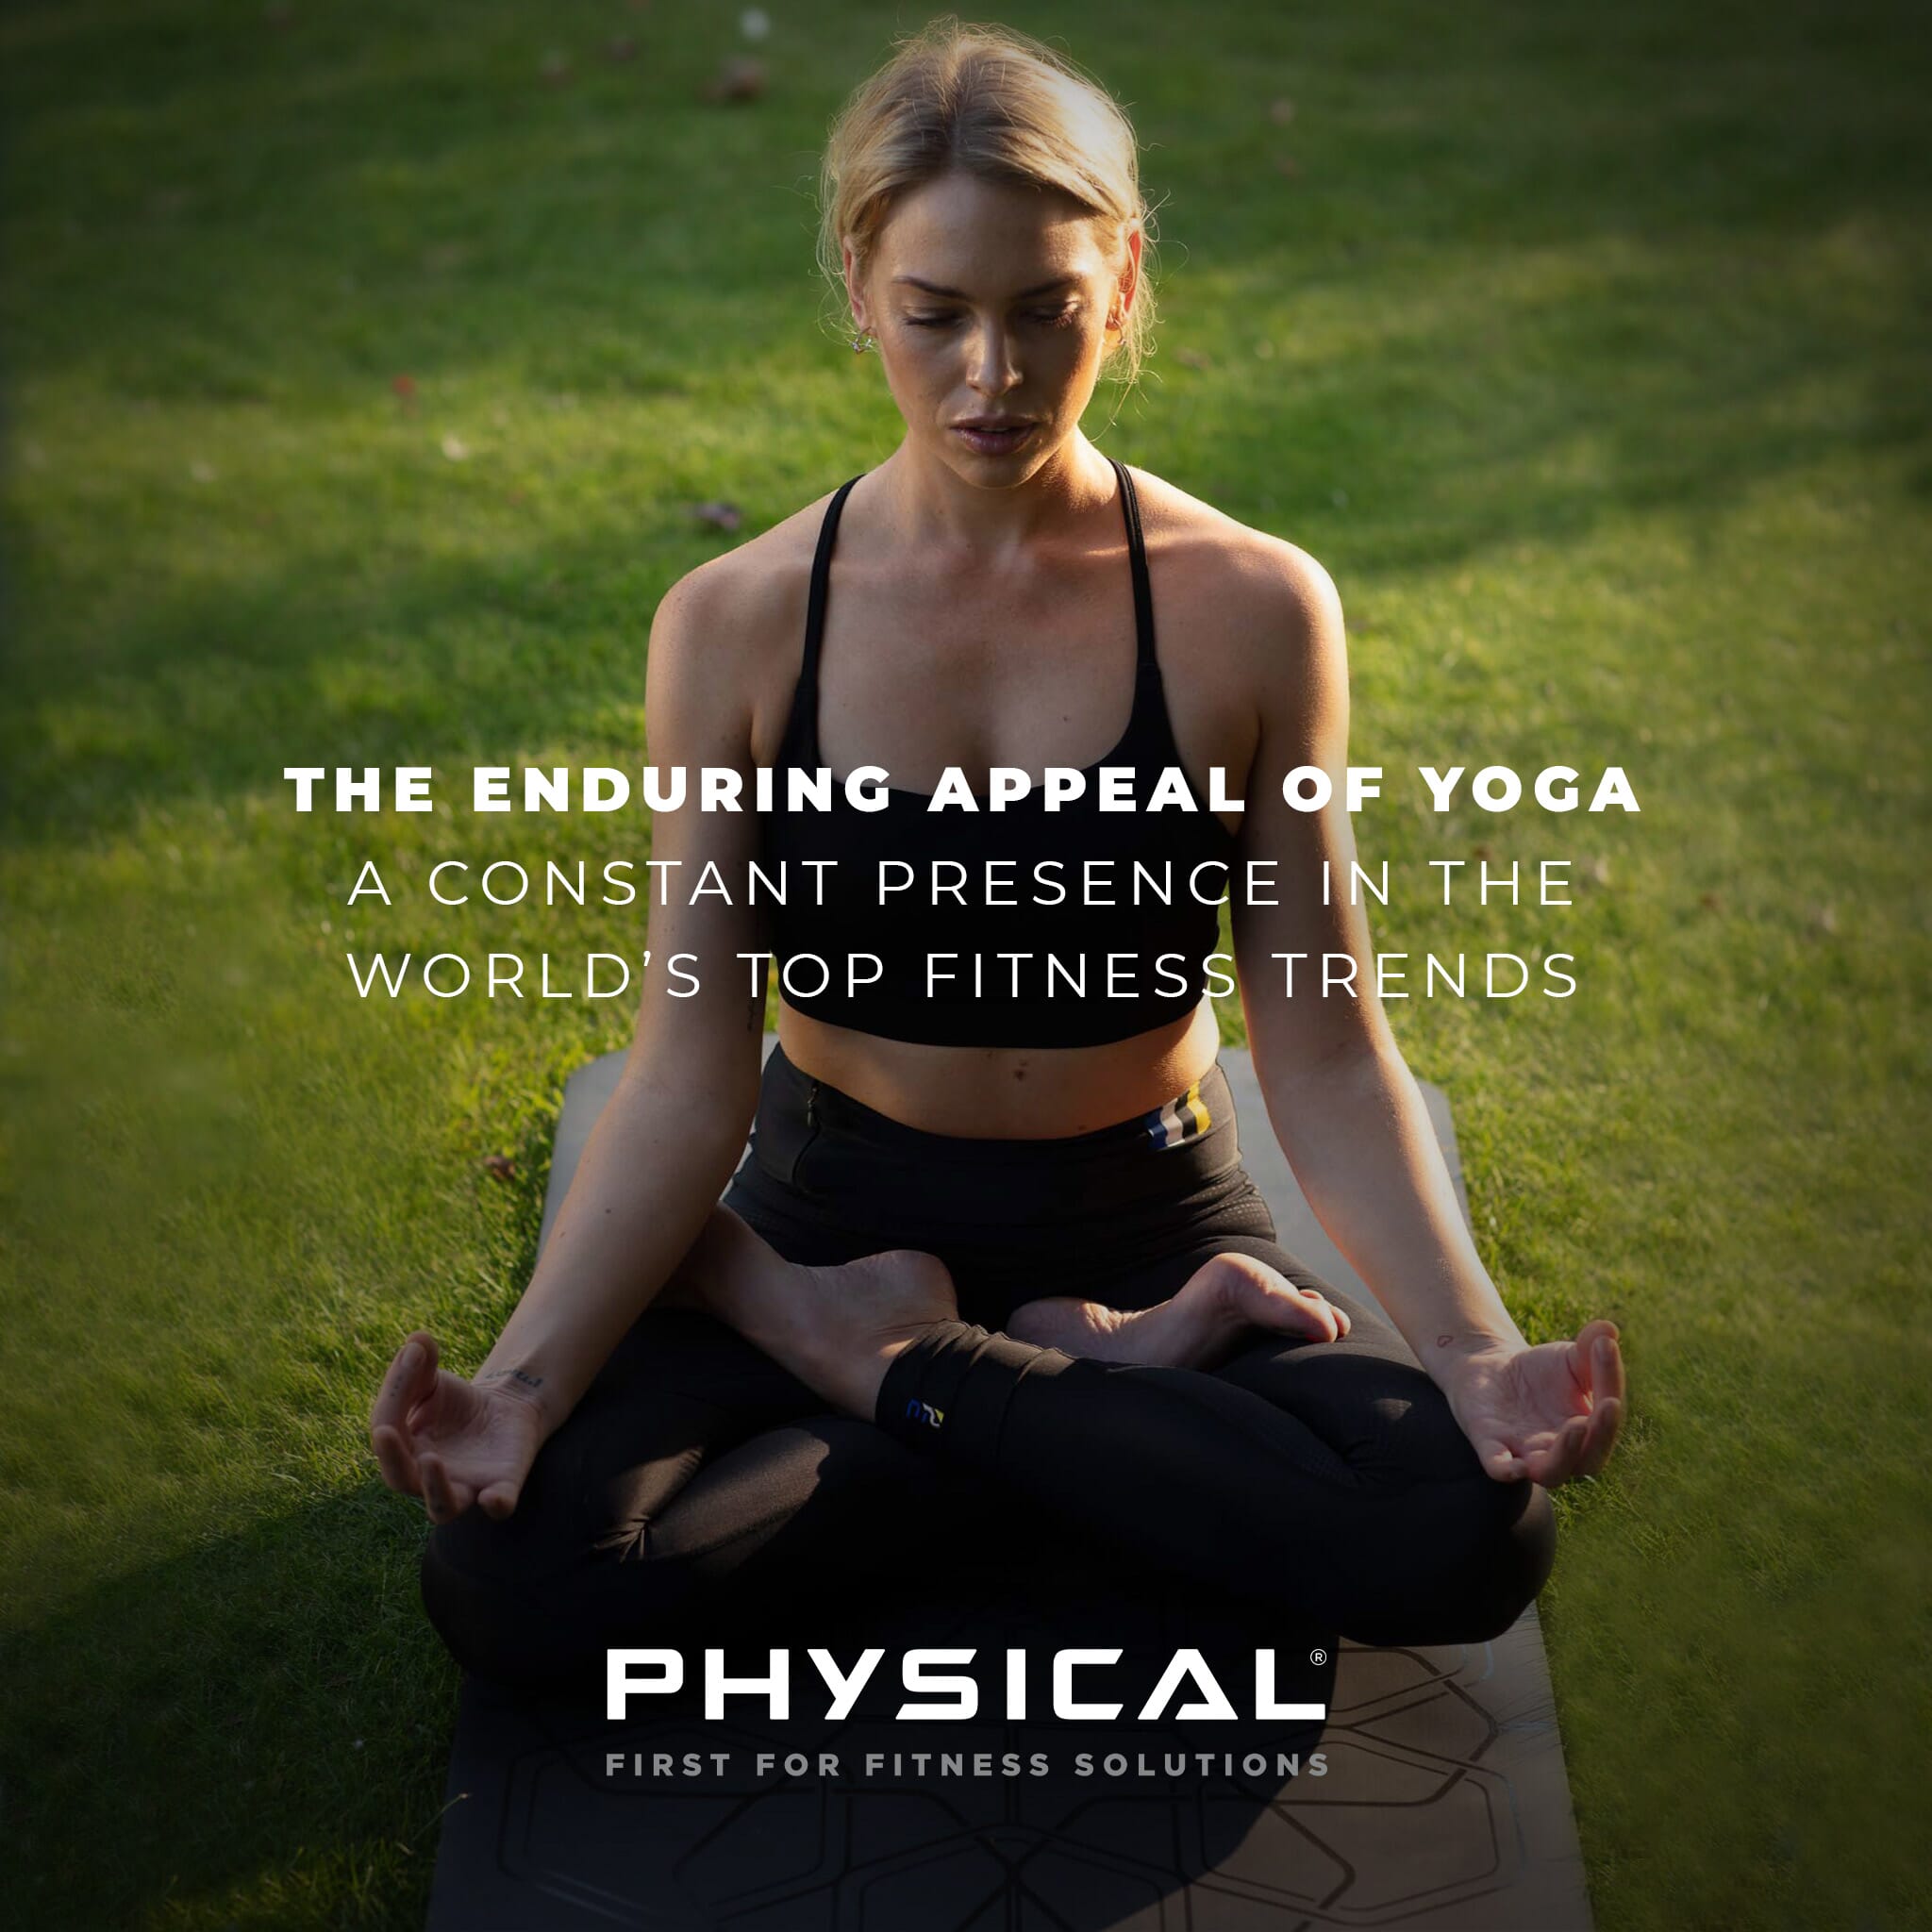 Physical Blog on the continuining appeal of Yoga